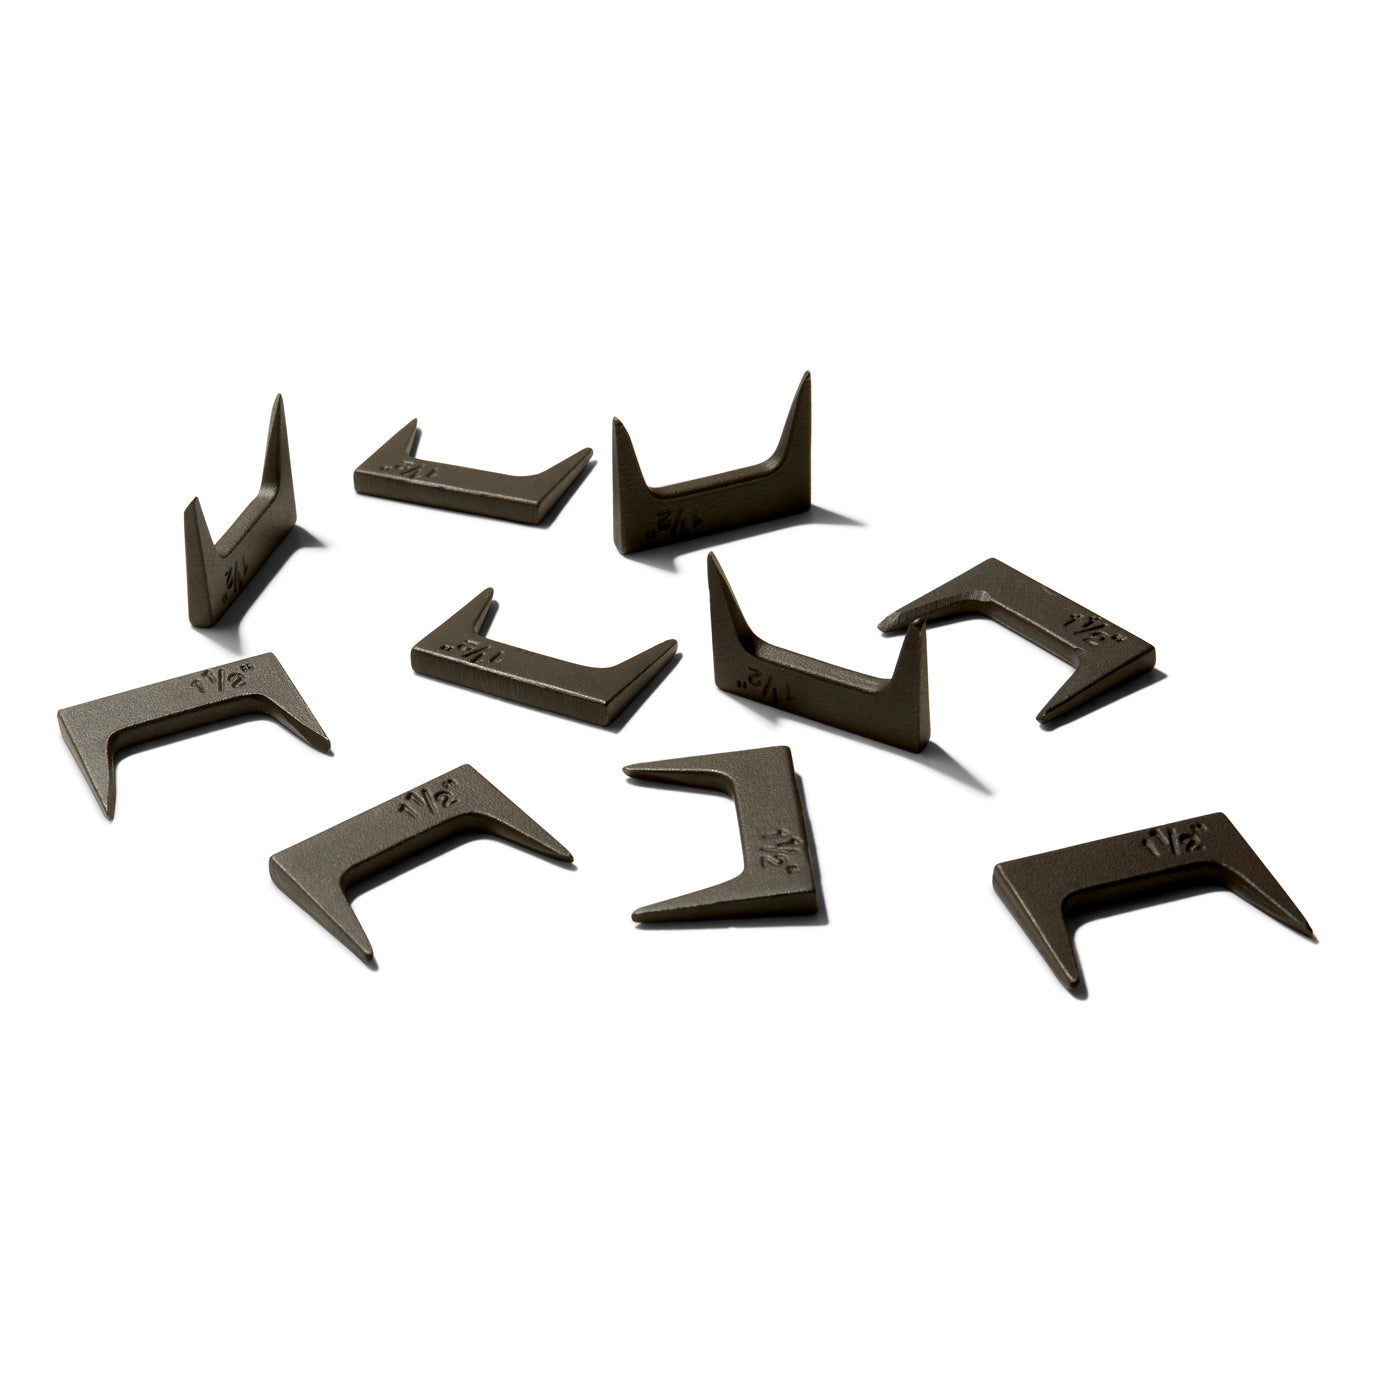 Pinch Dog Clamps - Pack of 10